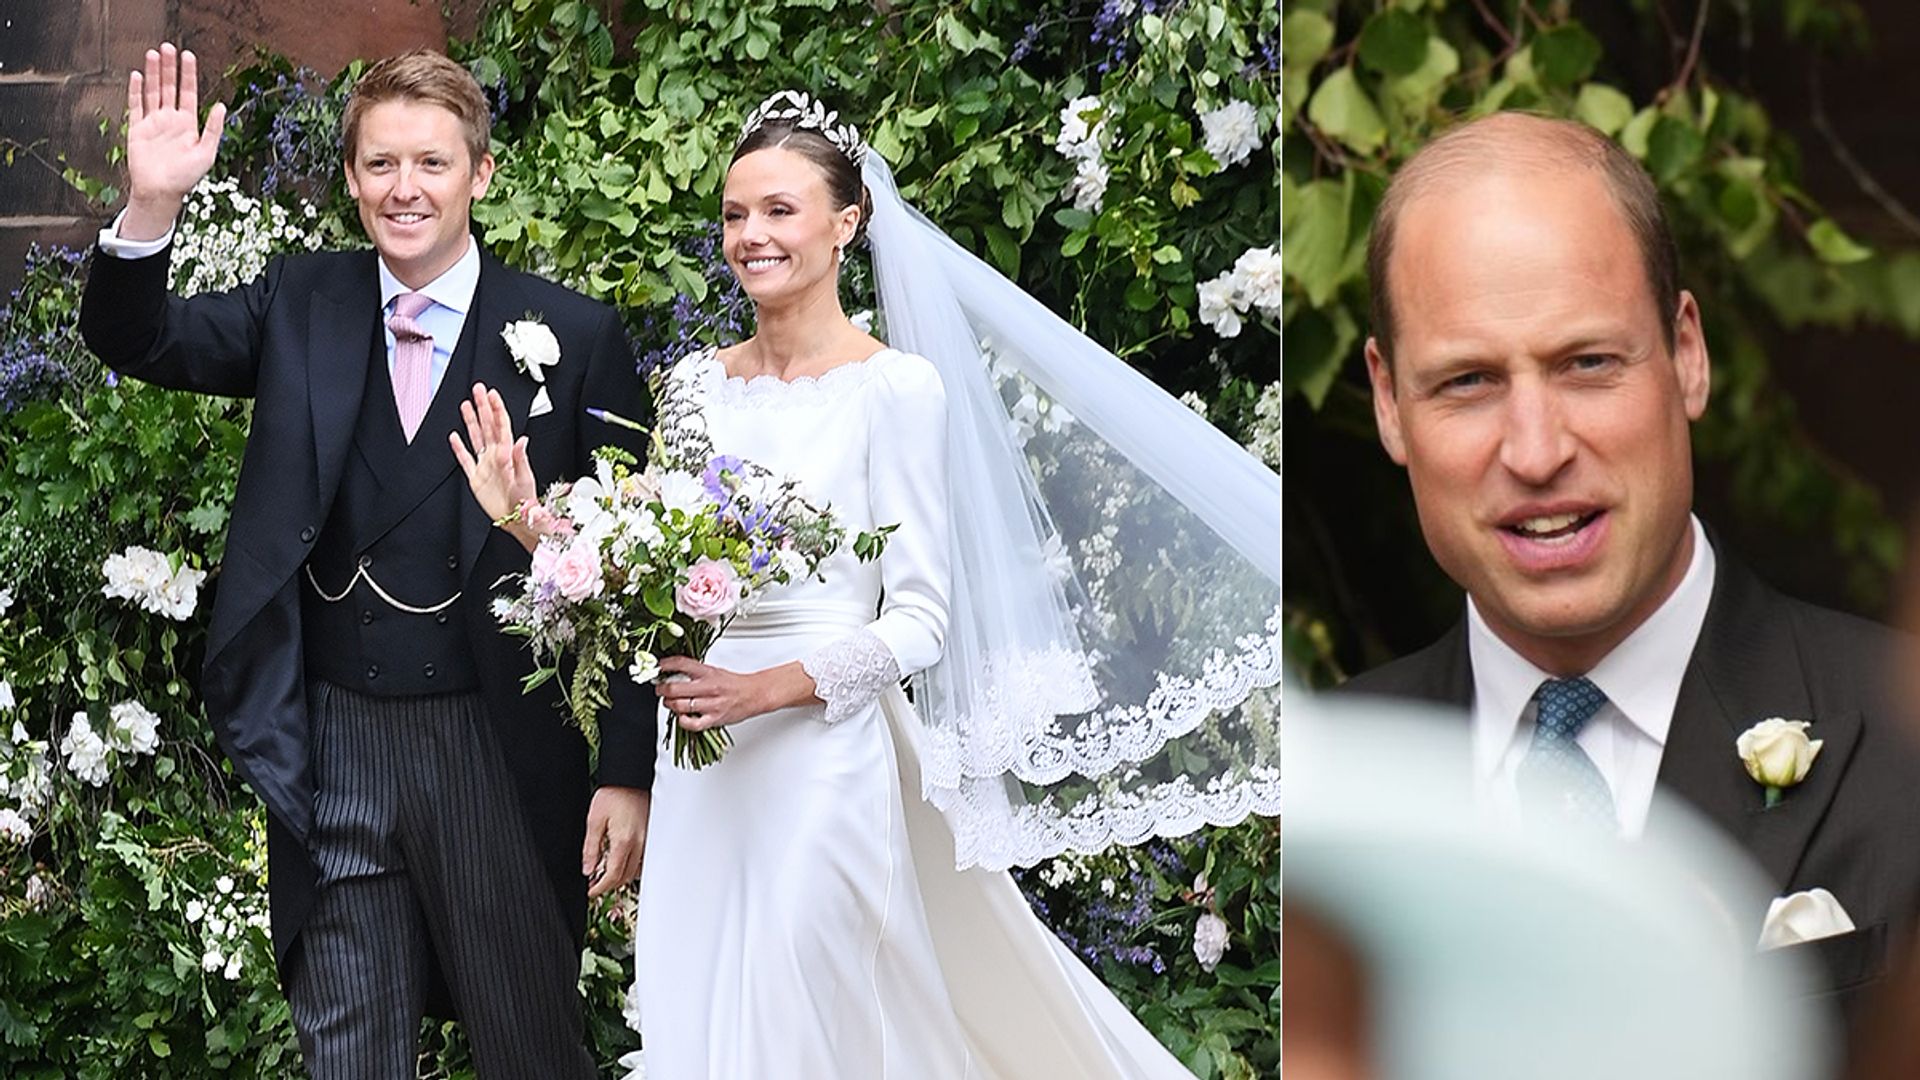 Prince William attended the Duke of Westminster's wedding